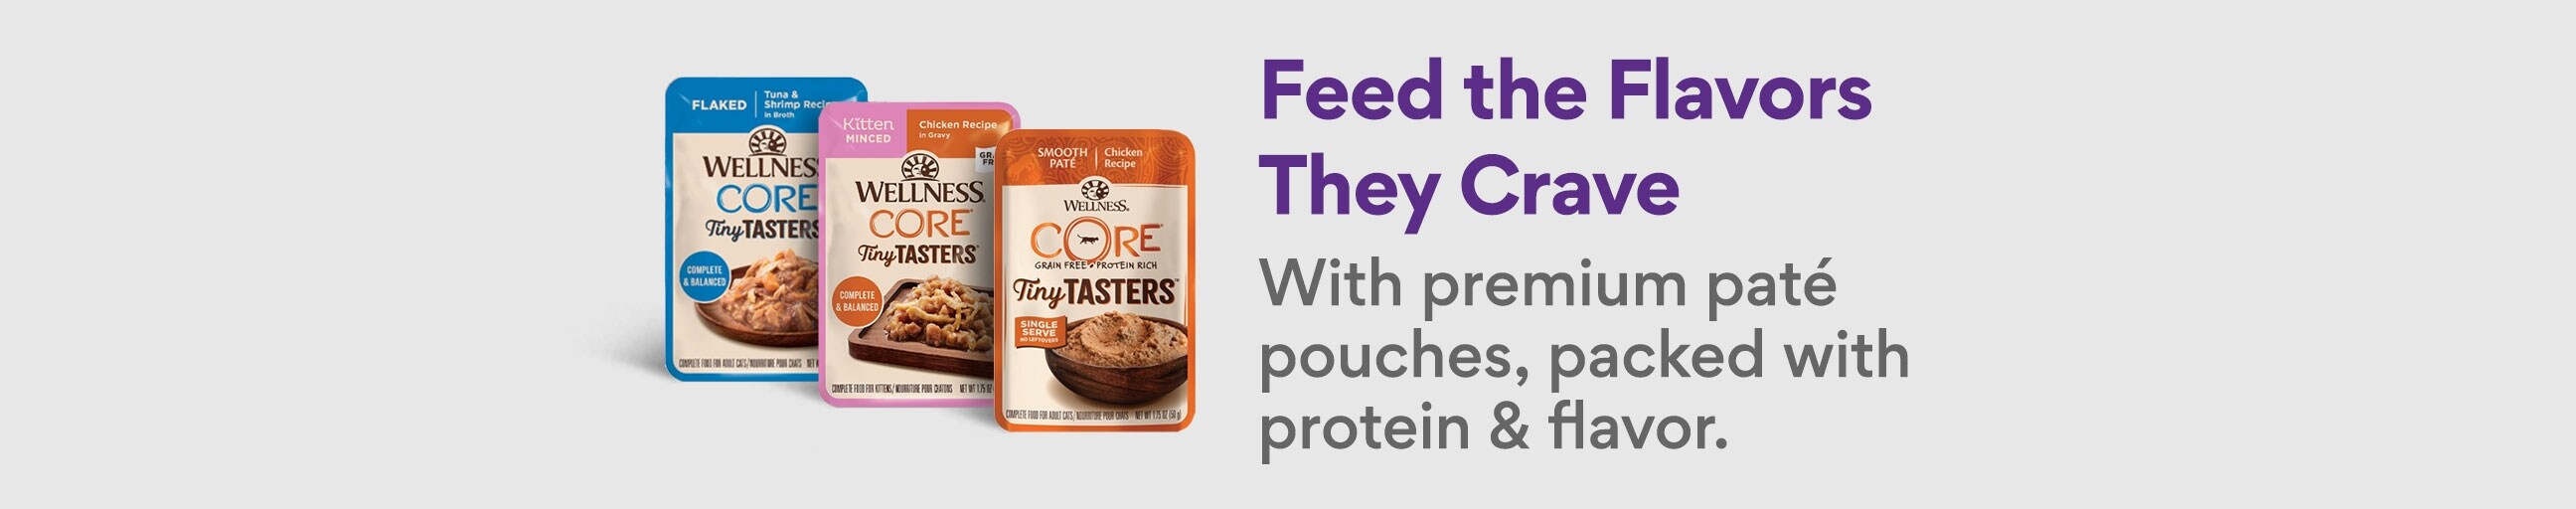 Wellness Feed the Flavors They Crave with premium pate pouches, packed with protein & flavor. Shop Now